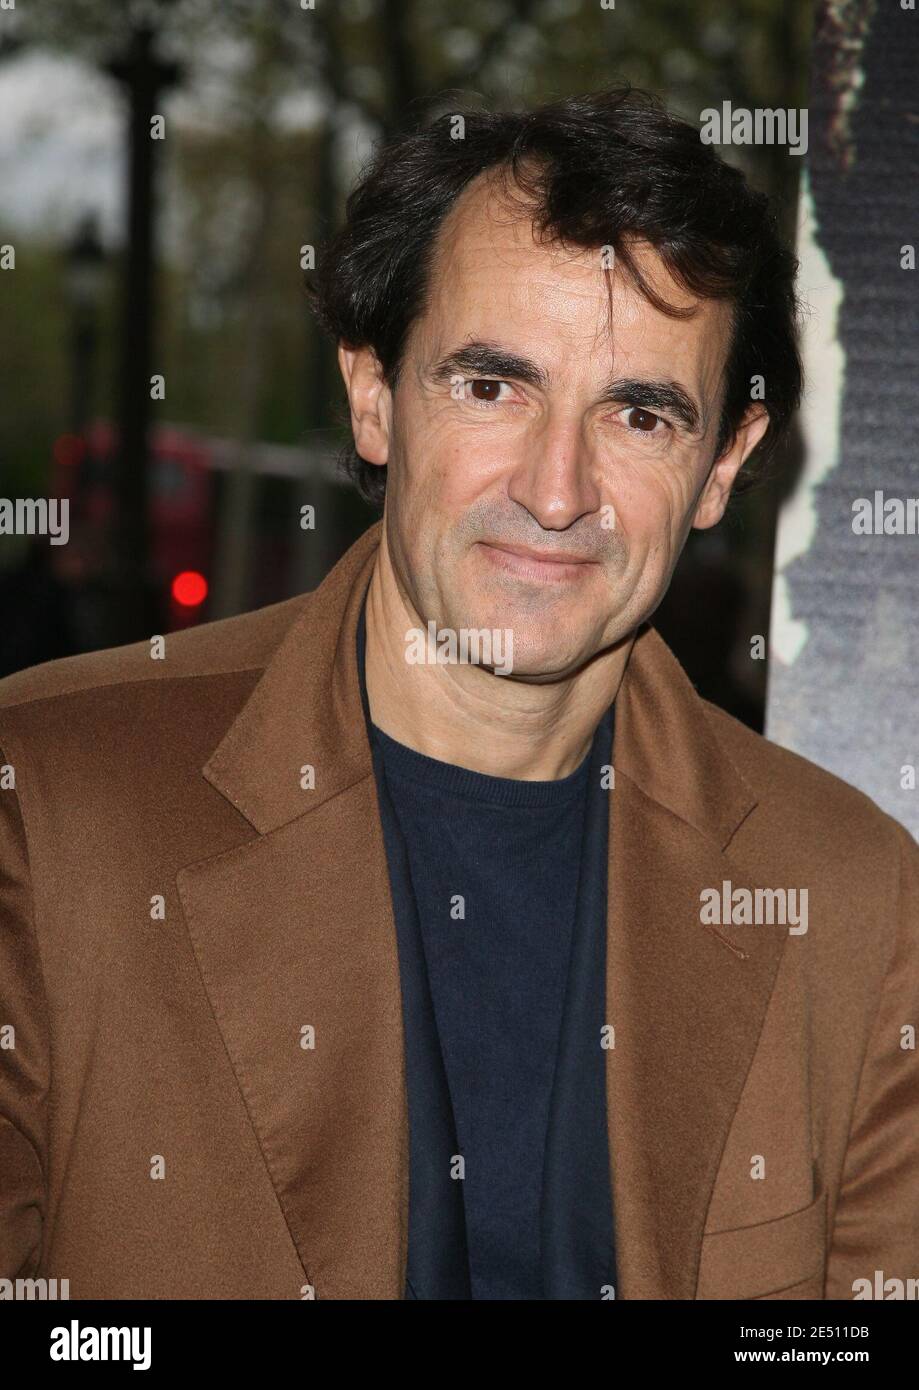 Actor Albert Dupontel attends the premiere of 2 Jours A Tuer' held at ...